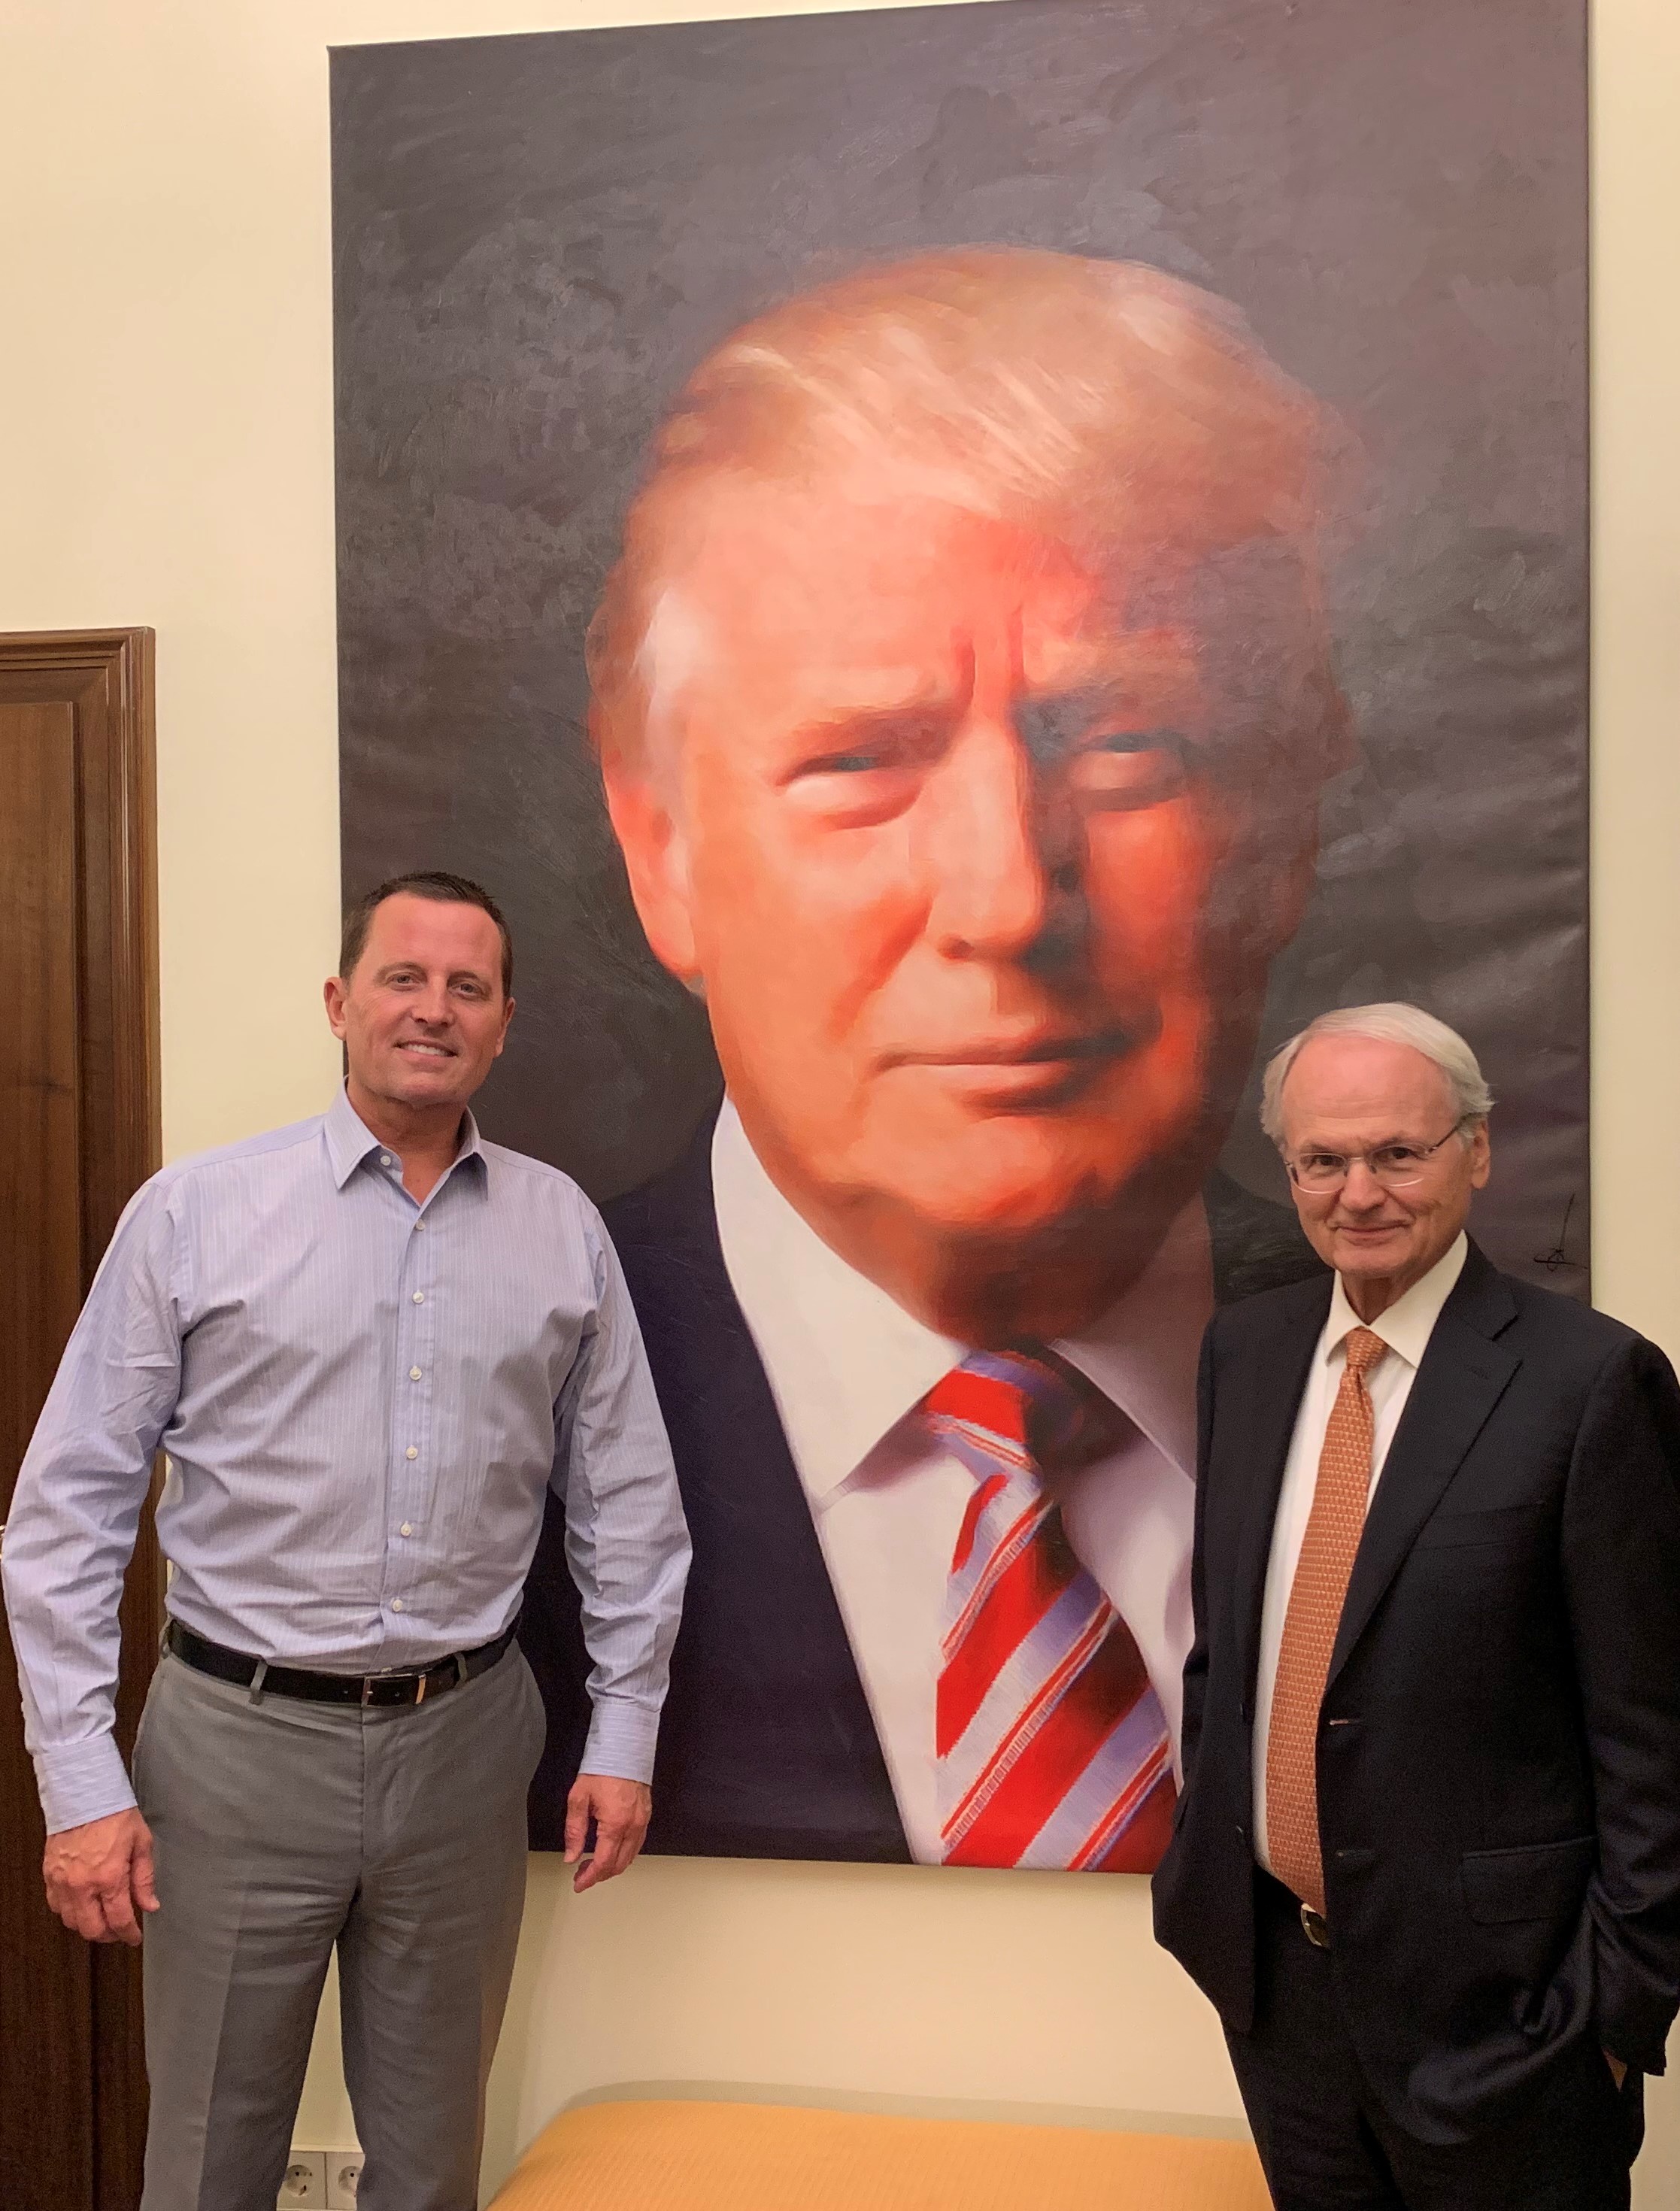 Richard Grenell, left, poses with Morton Klein, head of the Zionist Organization of America. Photo | ZOA